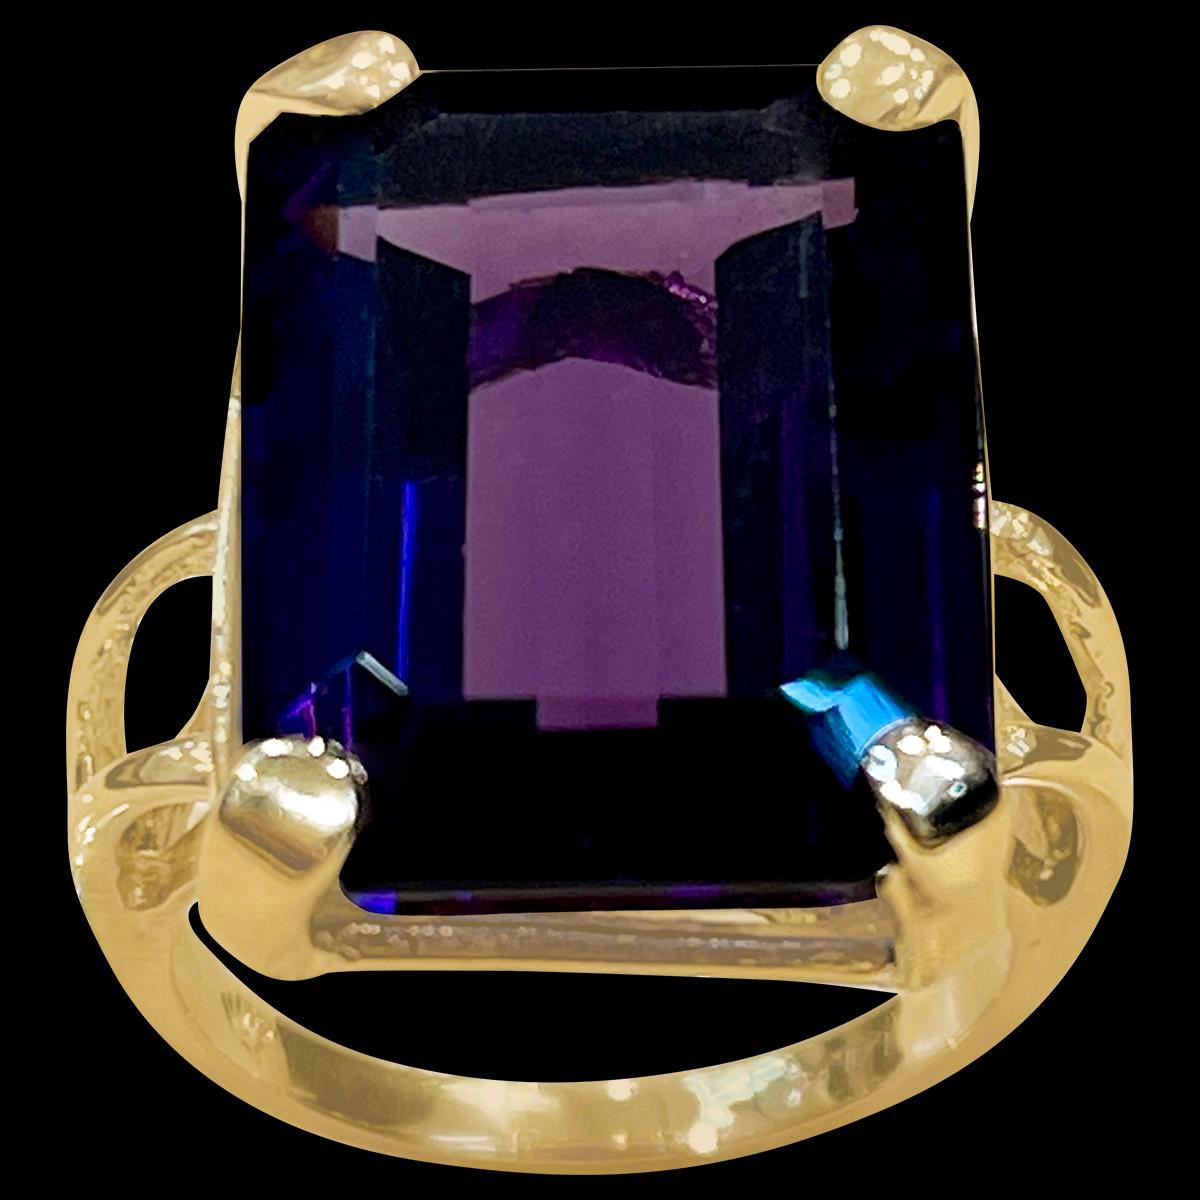 Exact 13.03 Carat Emerald Cut Amethyst  Cocktail Ring in 14 Karat Yellow Gold Size 5.25
17 x 13 MM Amethyst  Cocktail Ring in 14 Karat Yellow Gold 

This is a Beautiful Cocktail ring ring which has a large 13  carat of  Amethyst . Color and clarity